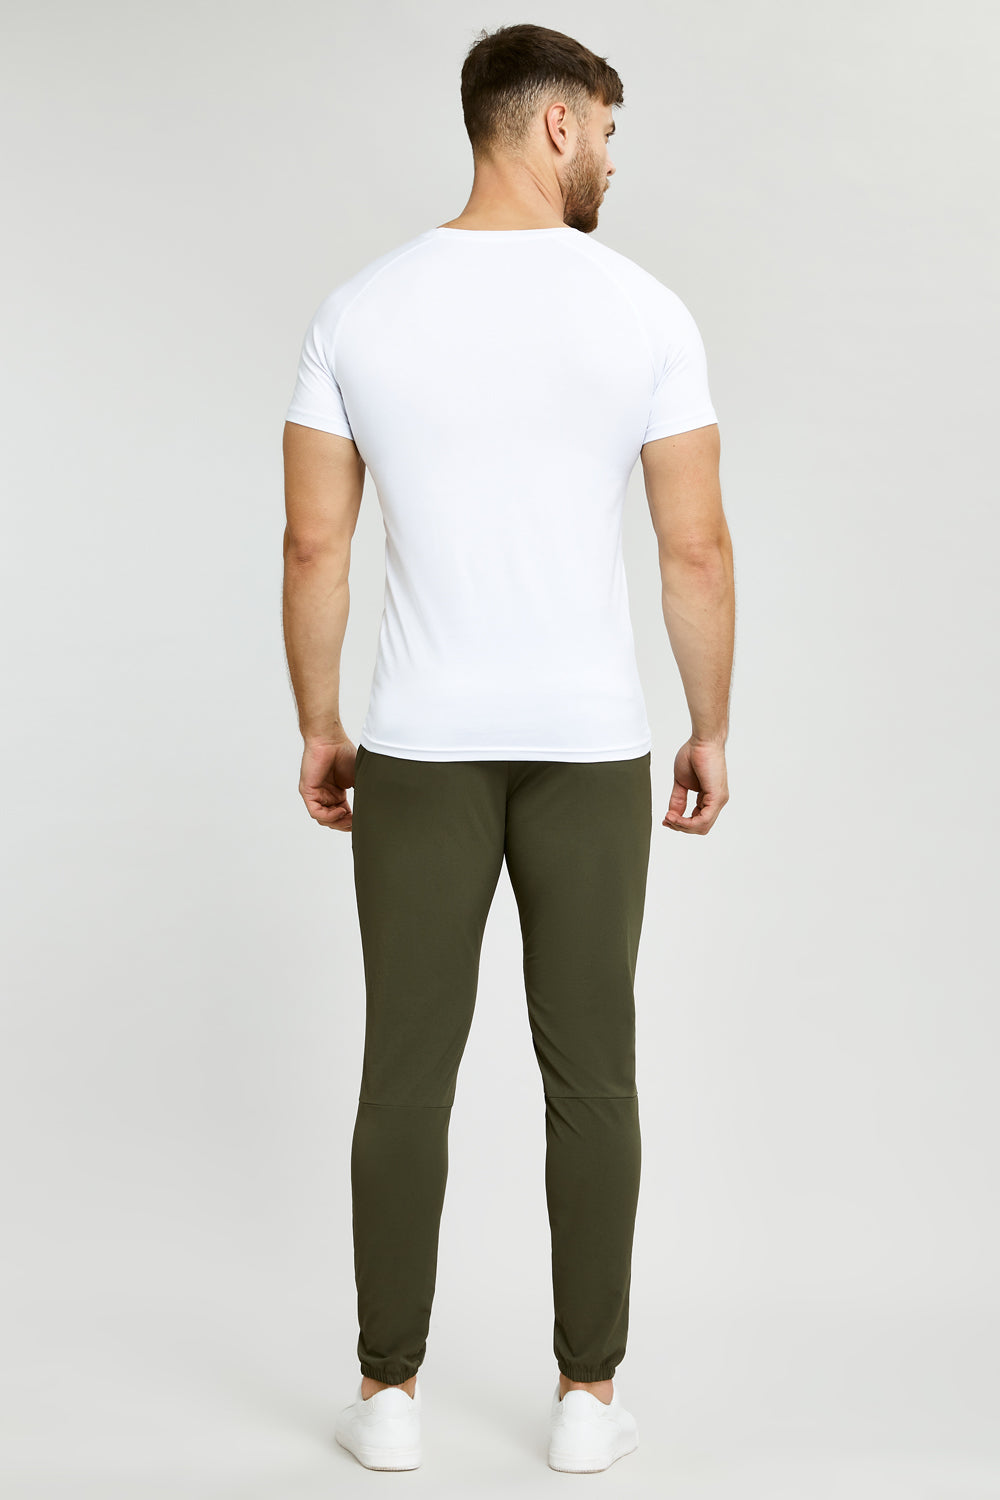 Buy Olive Green Shirts for Men by NETPLAY Online | Ajio.com